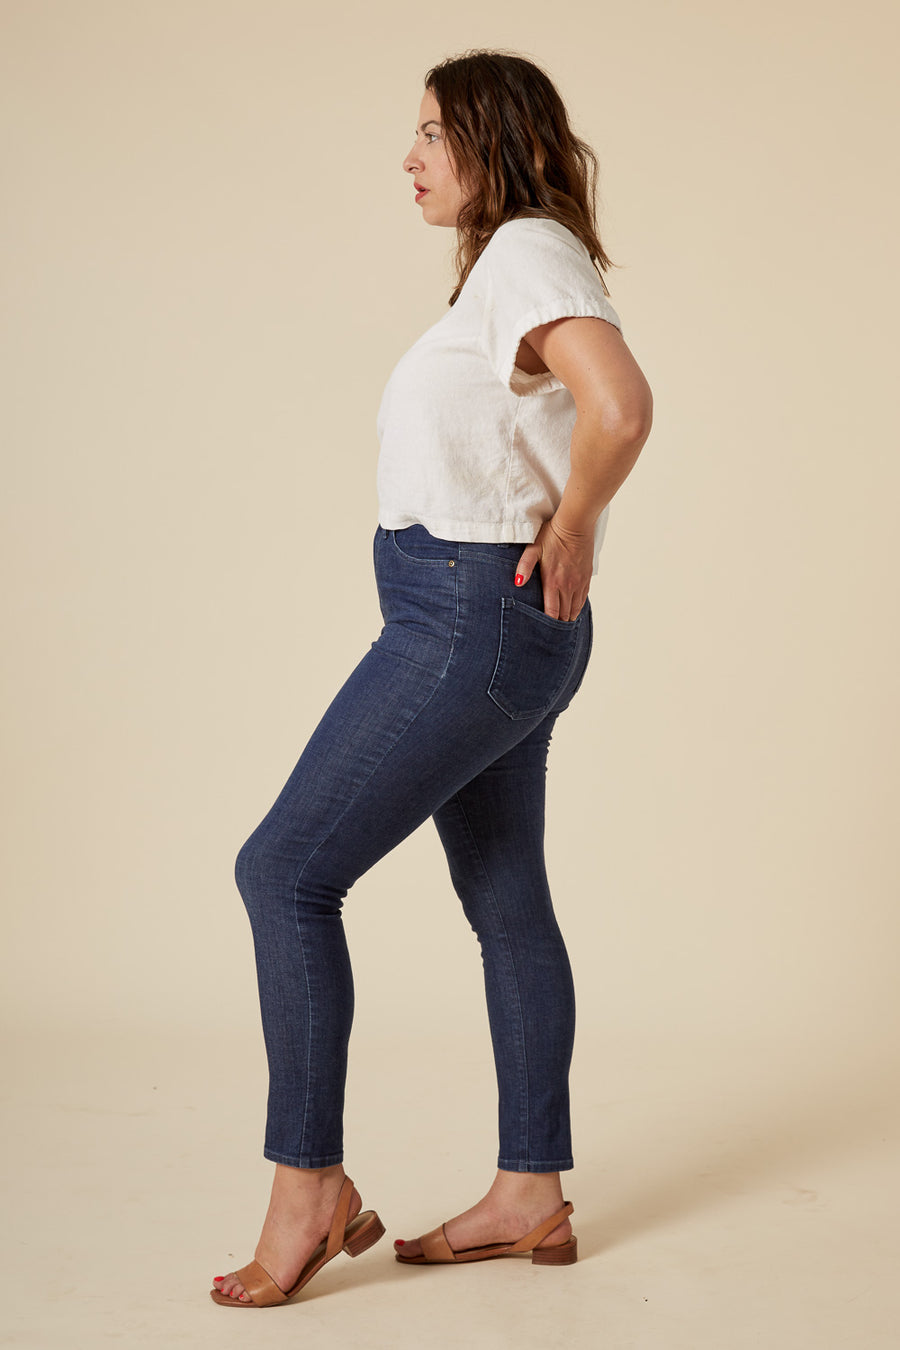 Closet Core Patterns Ginger Jeans pattern review by GeoP